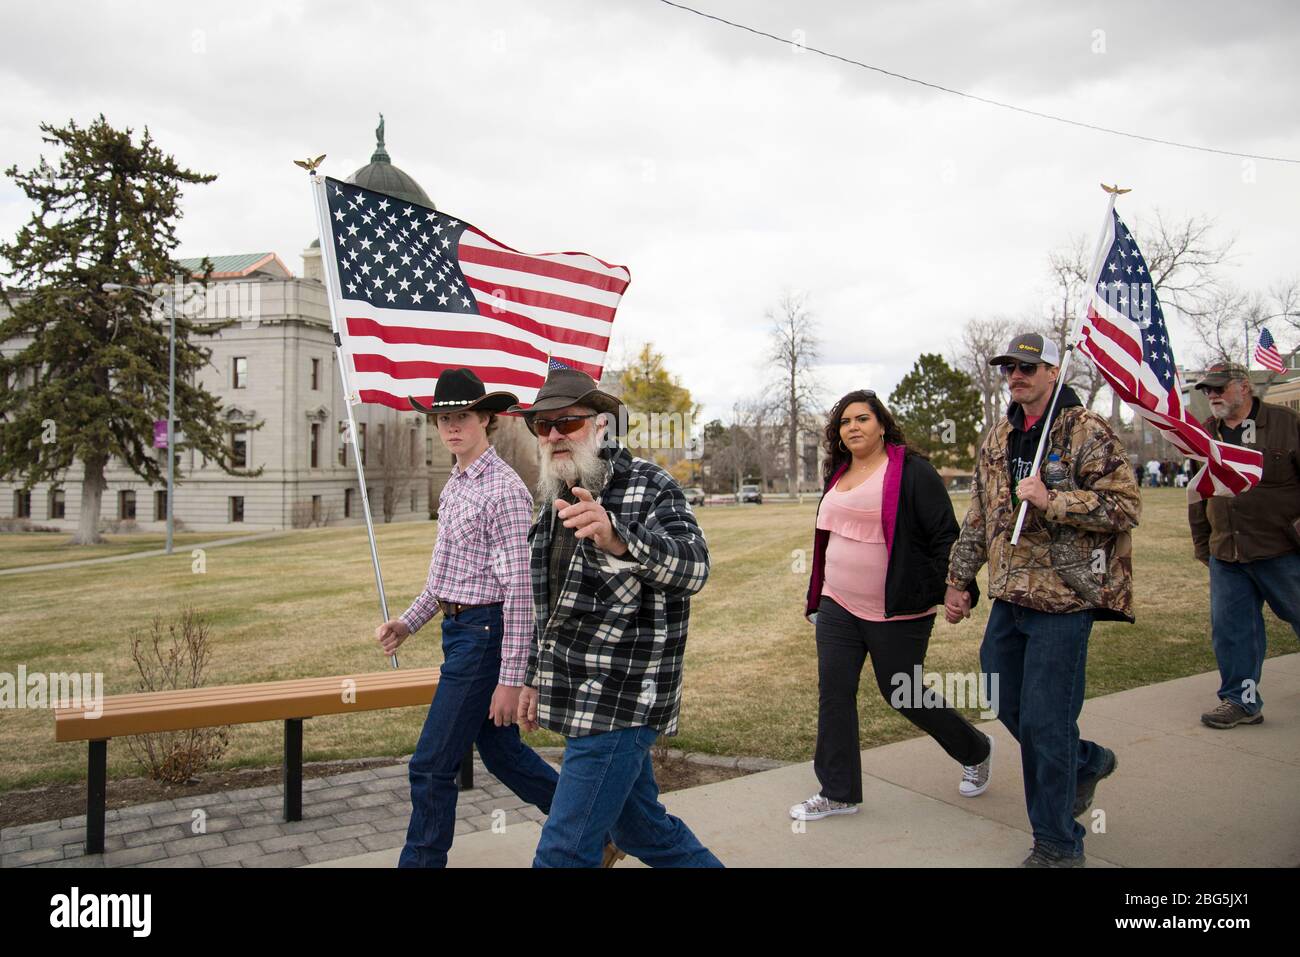 Helena, Montana - April 19, 2020: Group of protestors holding American flags, man looking at pointing at camera. Demonstrators at a protest against go Stock Photo